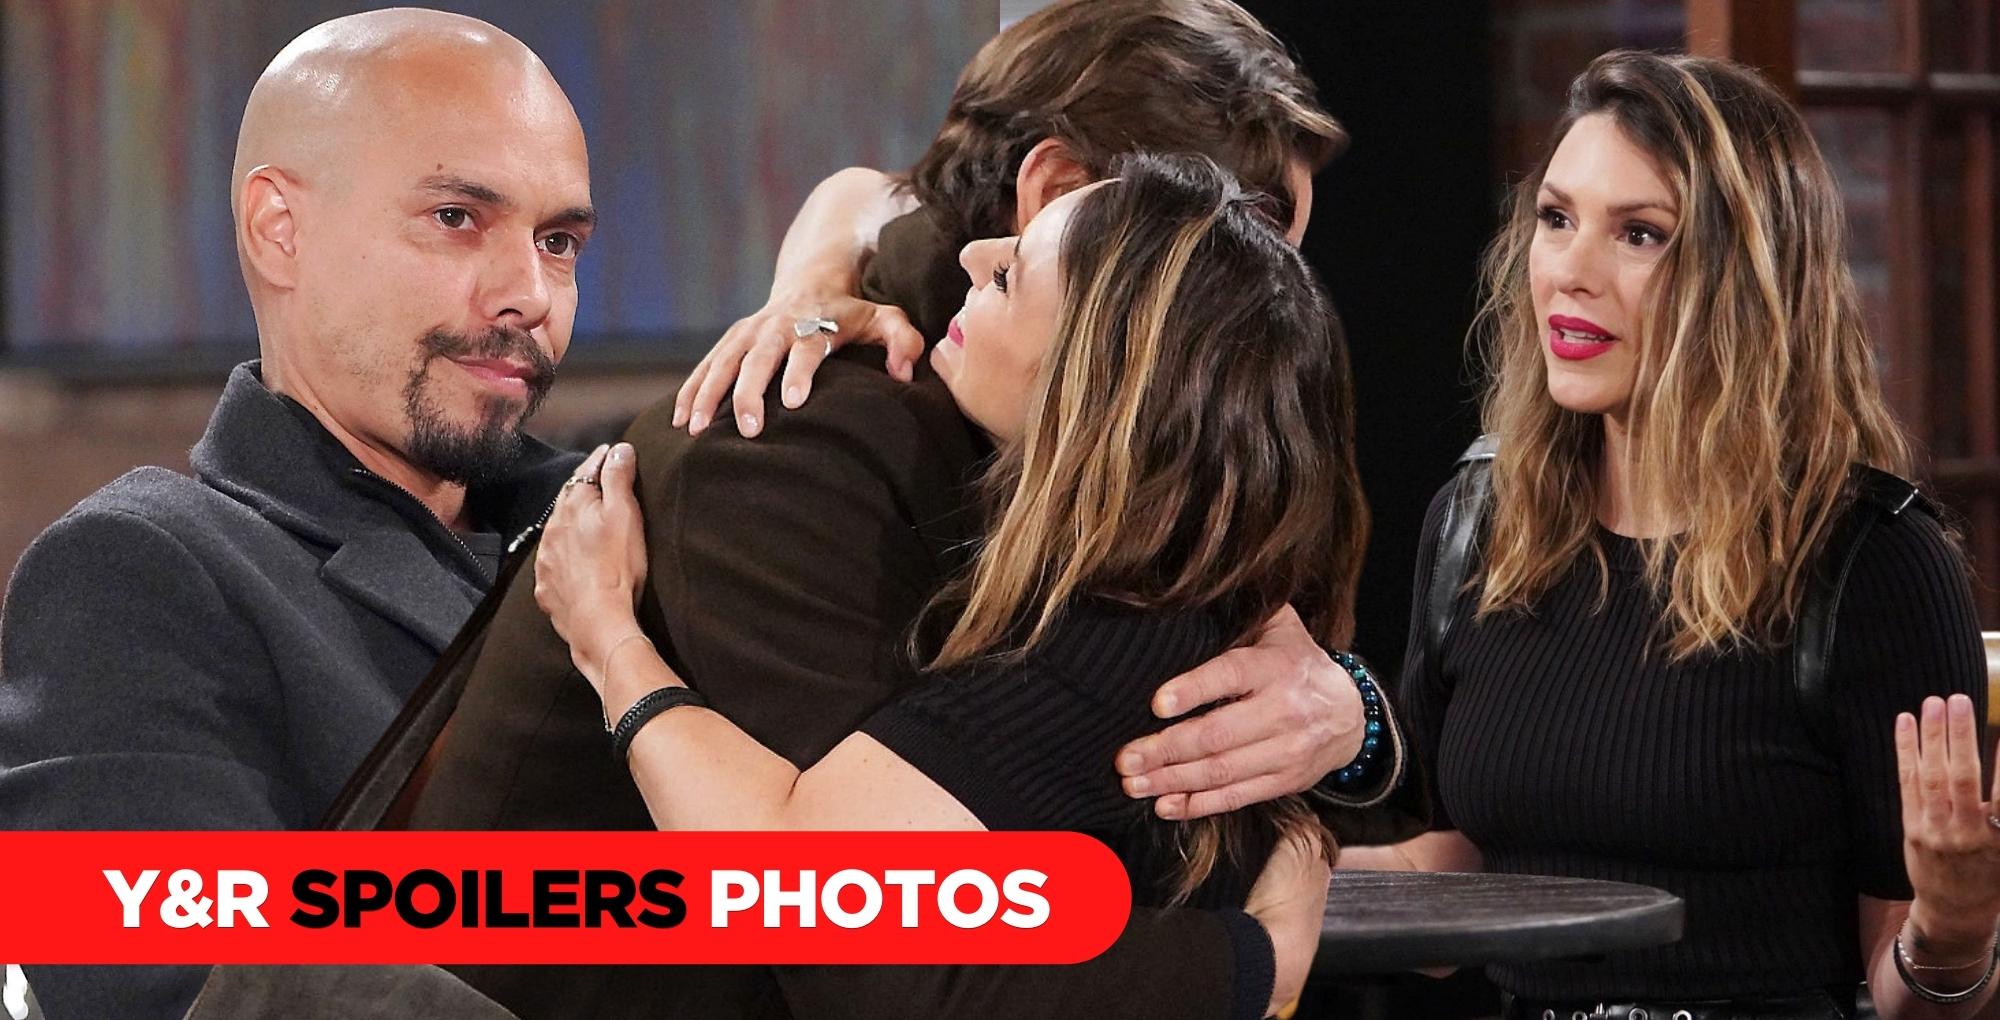 Y&R Spoilers Photos: Warm Reunions And A Big Dilemma